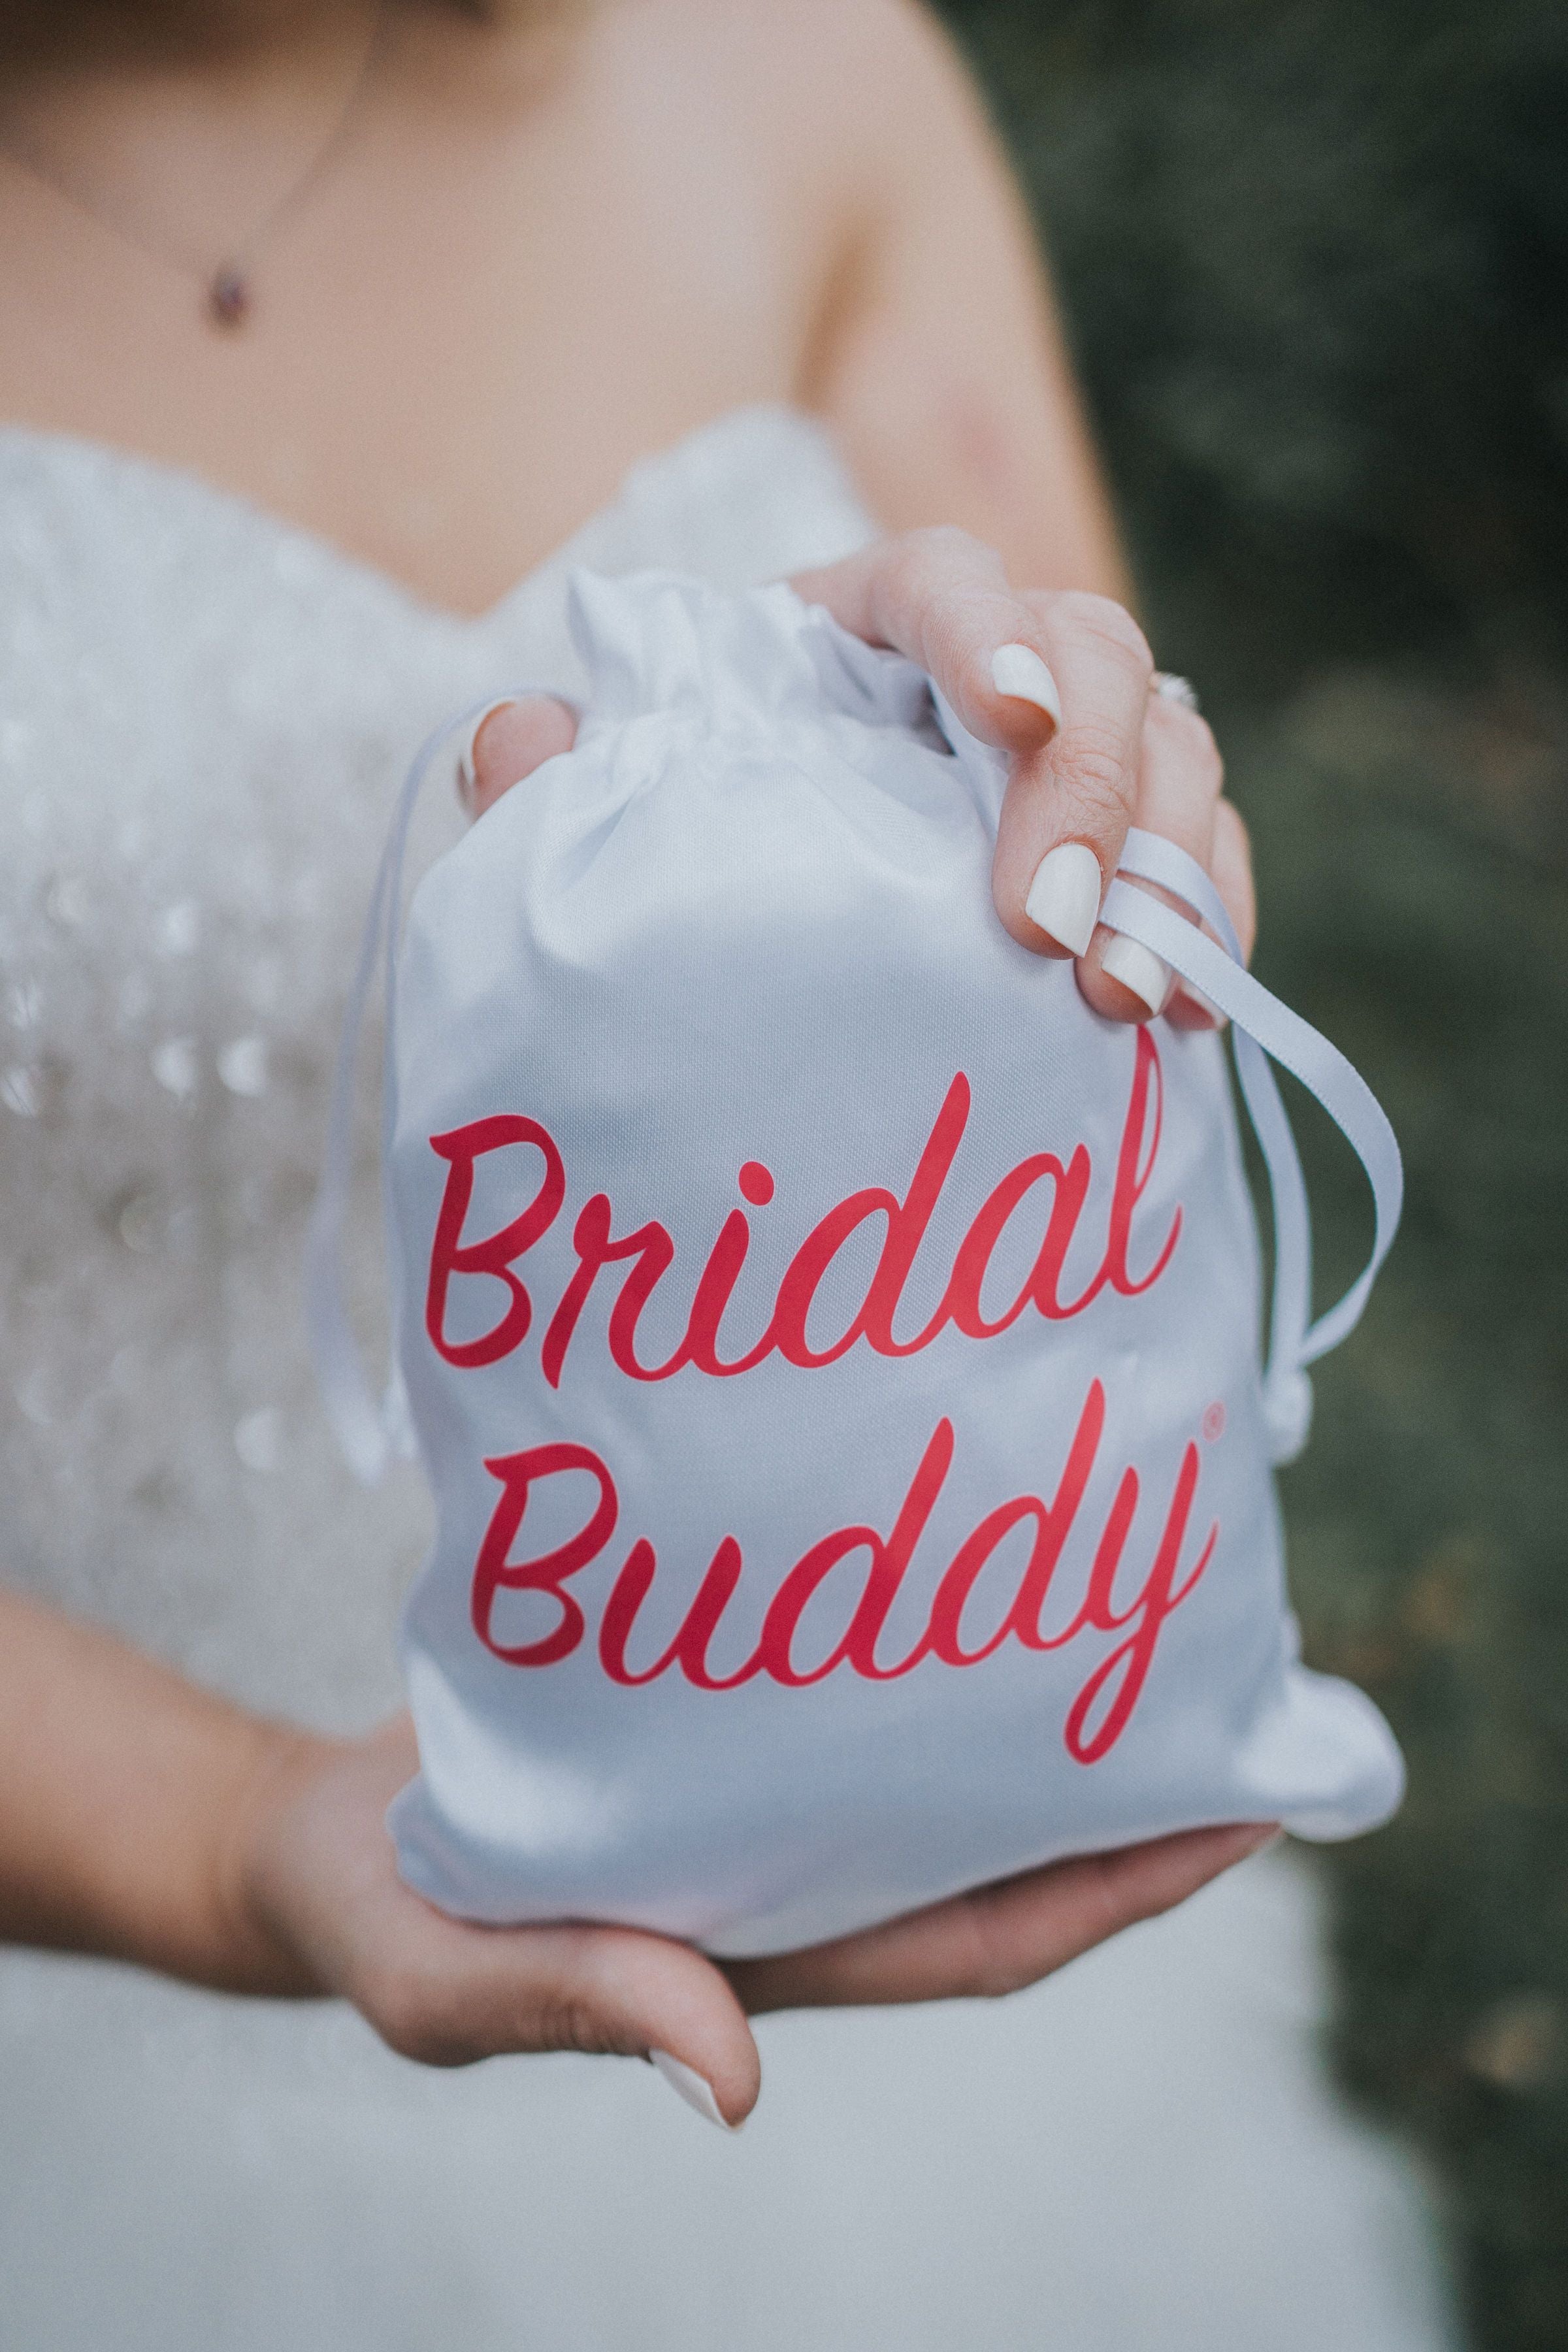 Bridal Buddy PROTECTS your gown for #weddings #cosplay #pageants #prom, bridal  buddy